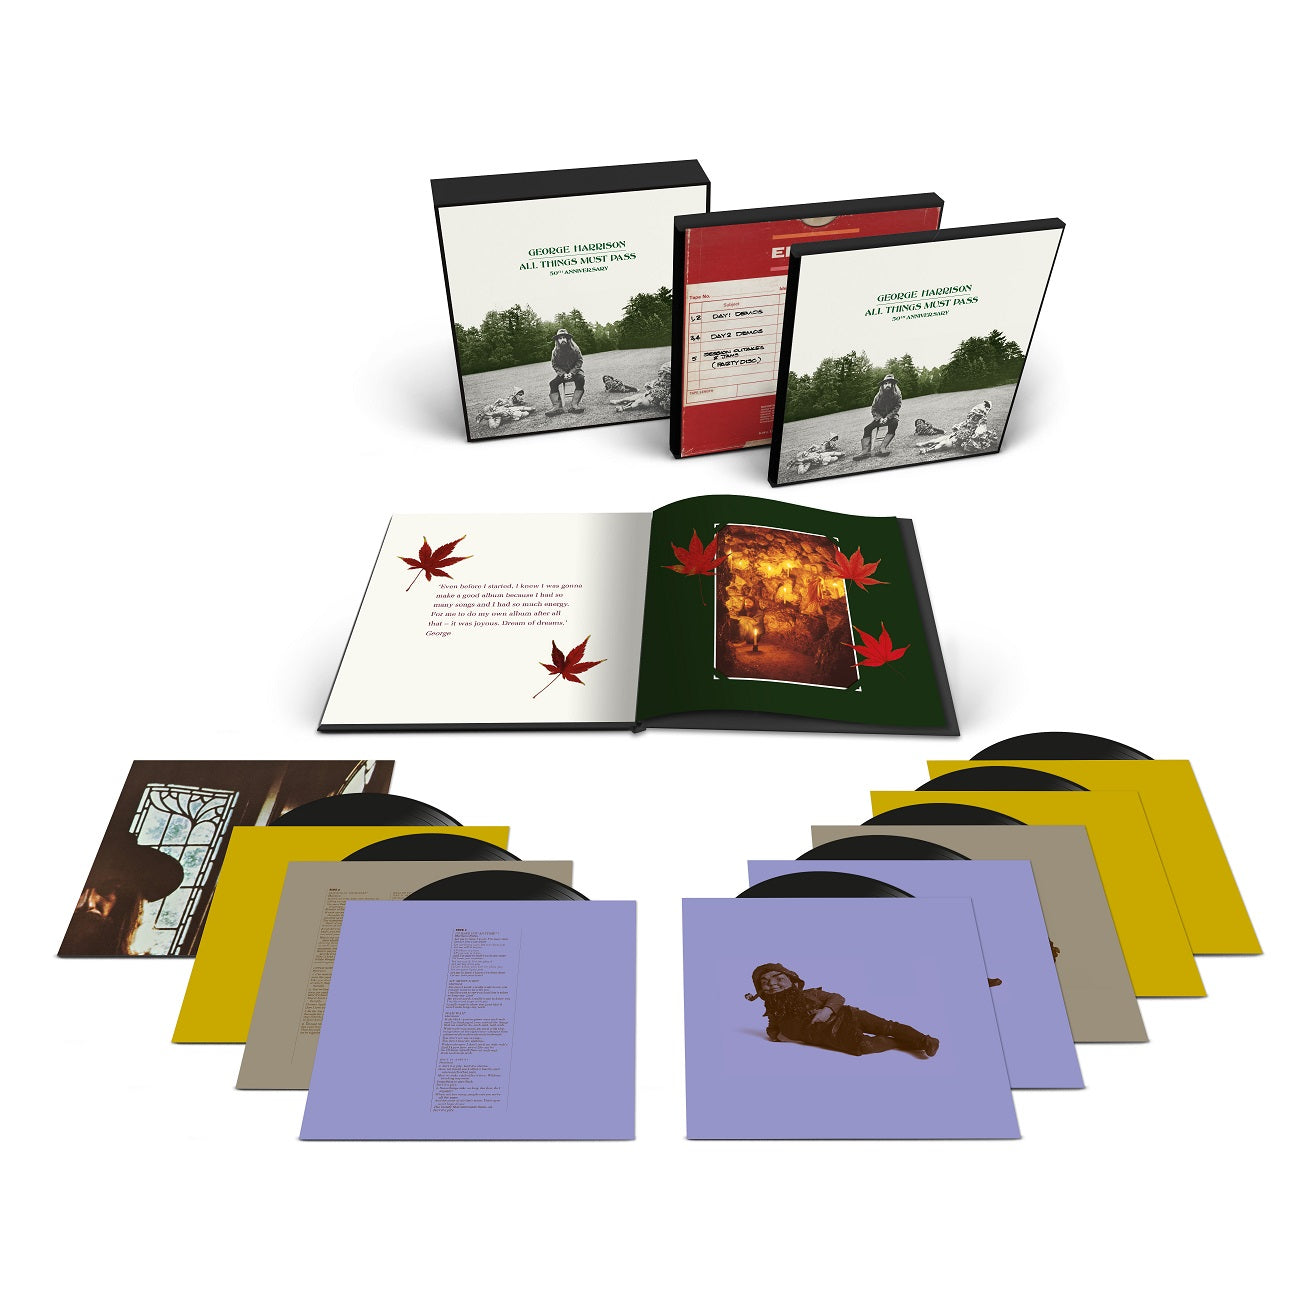 George Harrison | All Things Must Pass [Super Deluxe 8 LP Box Set] | Vinyl - 0